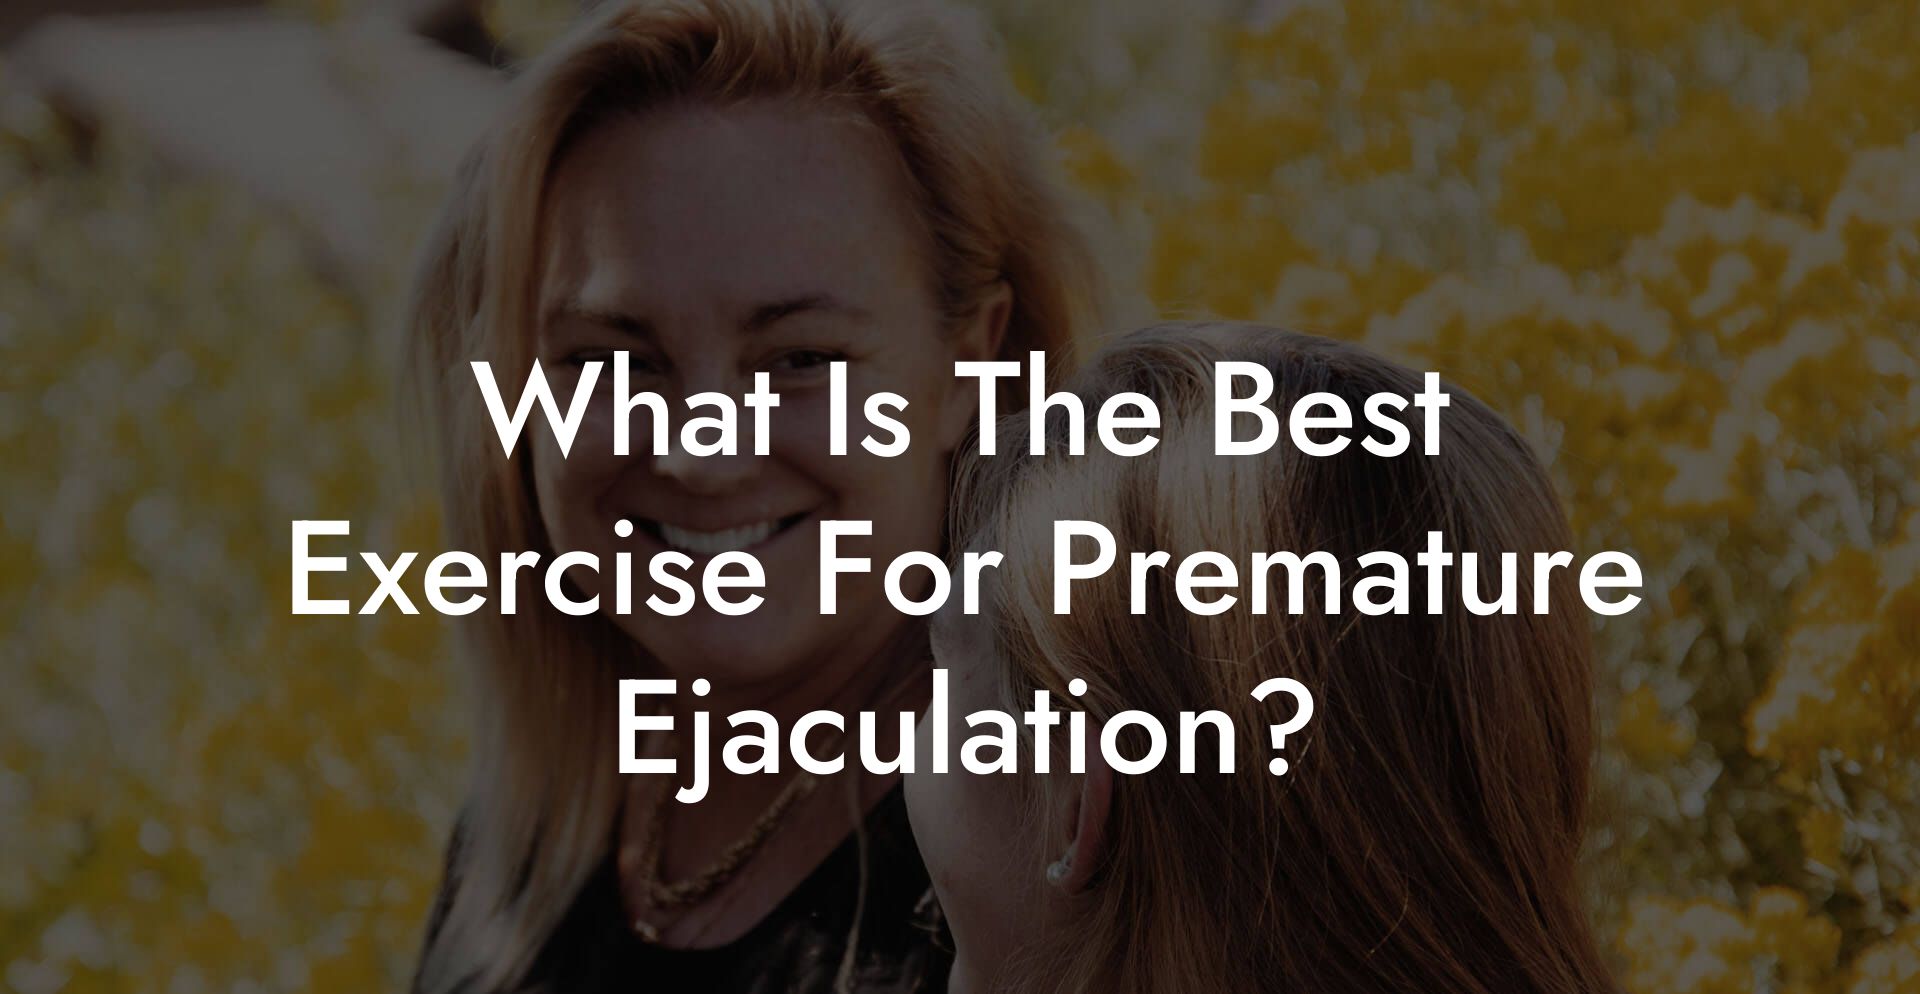 What Is The Best Exercise For Premature Ejaculation?